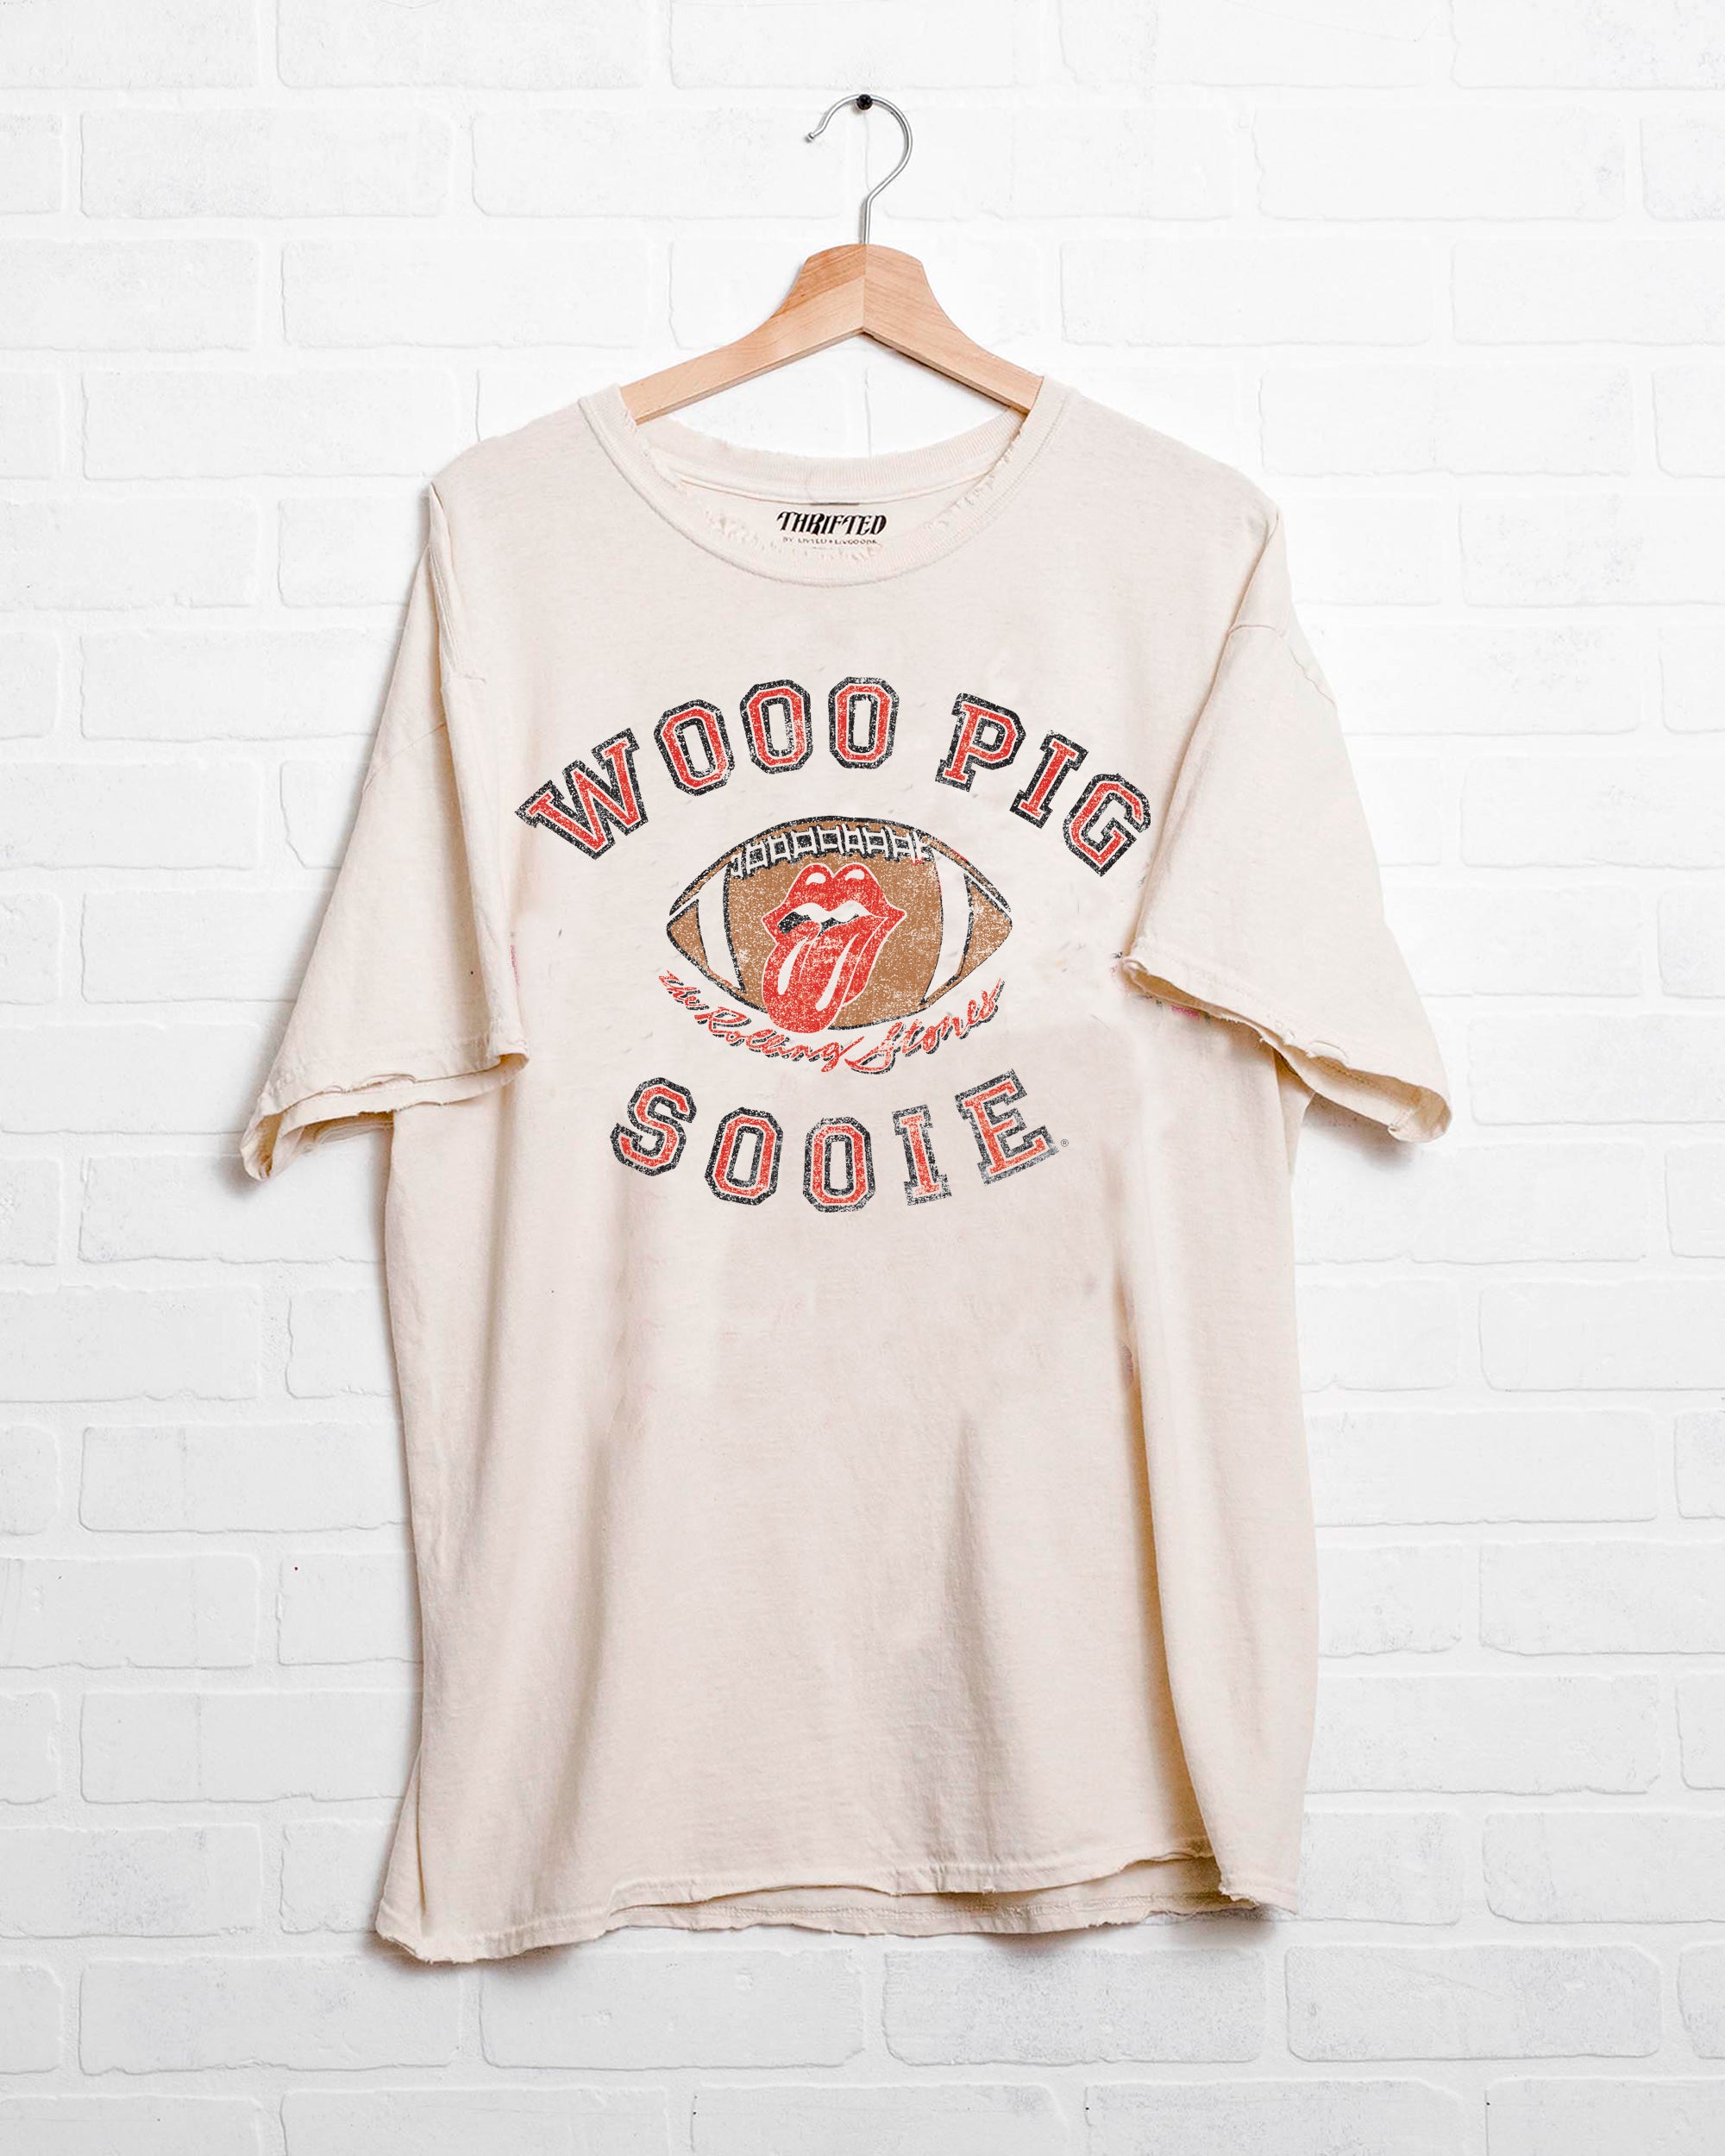 Rolling Stones Wooo Pig Sooie Football Lick Off White Thrifted Tee - shoplivylu